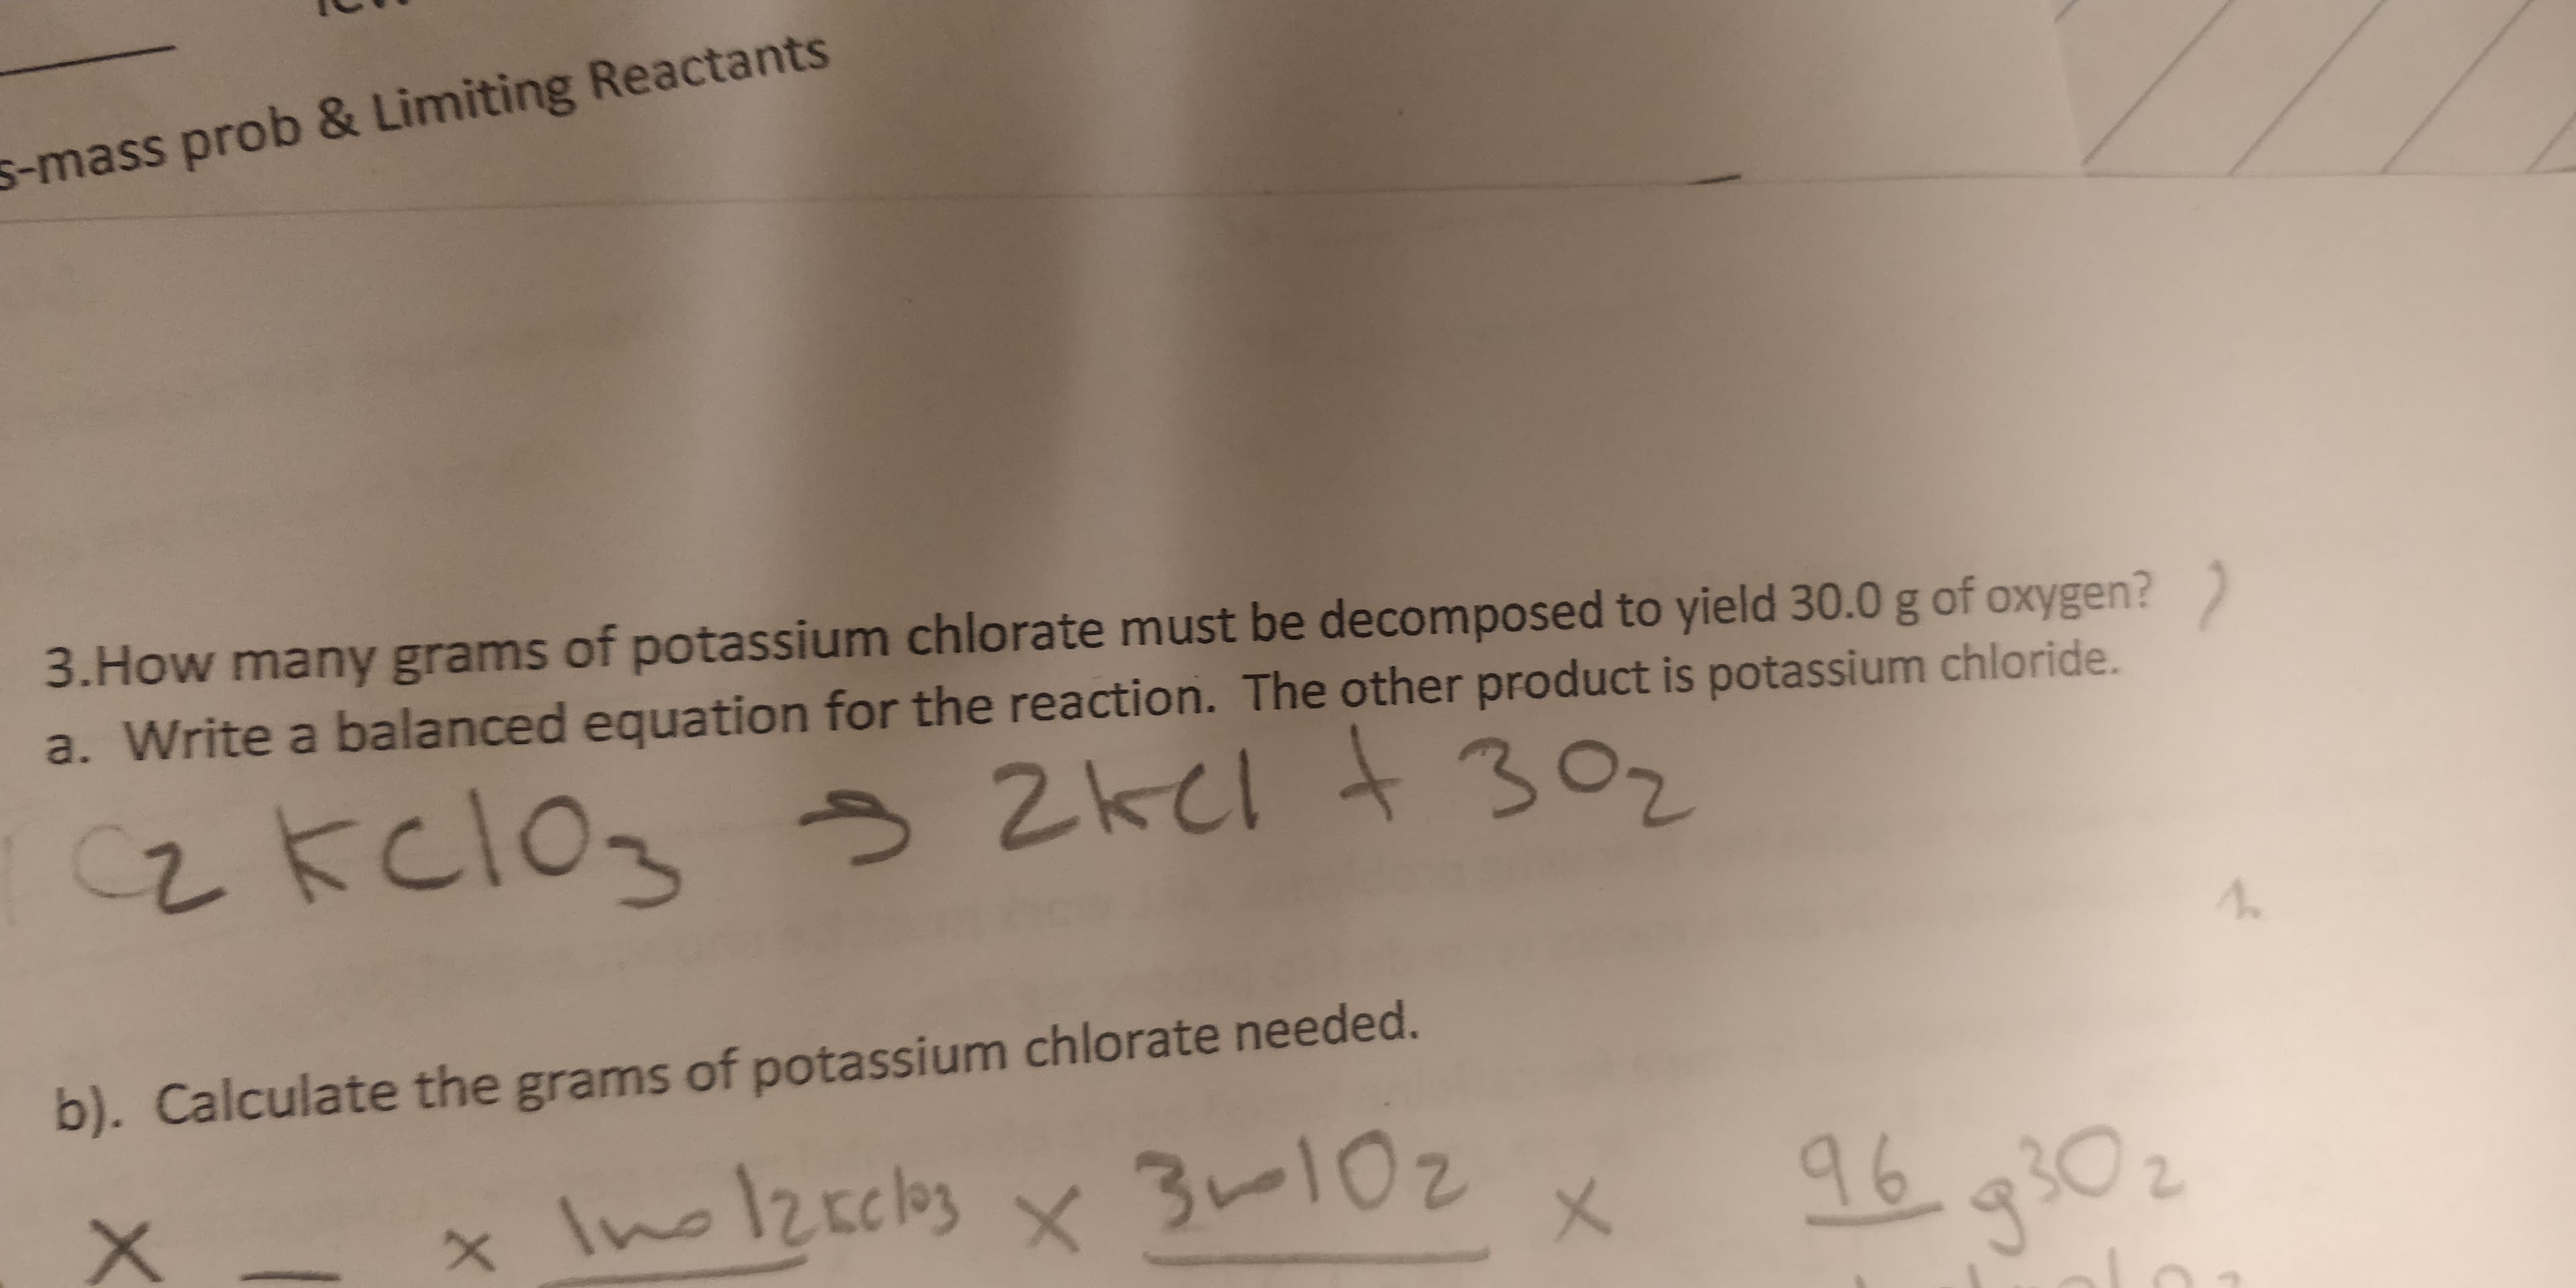 s-mass prob & Limiting Reactants
3.How many grams of potassium chlorate must be decomposed to yield 30.0 g of oxygen?
a. Write a balanced equation for the reaction. The other product is potassium chloride.
2kcl t302
2kclo
b). Calculate the grams of potassium chlorate needed.
Ino12rcks
96 90
3-102
X
